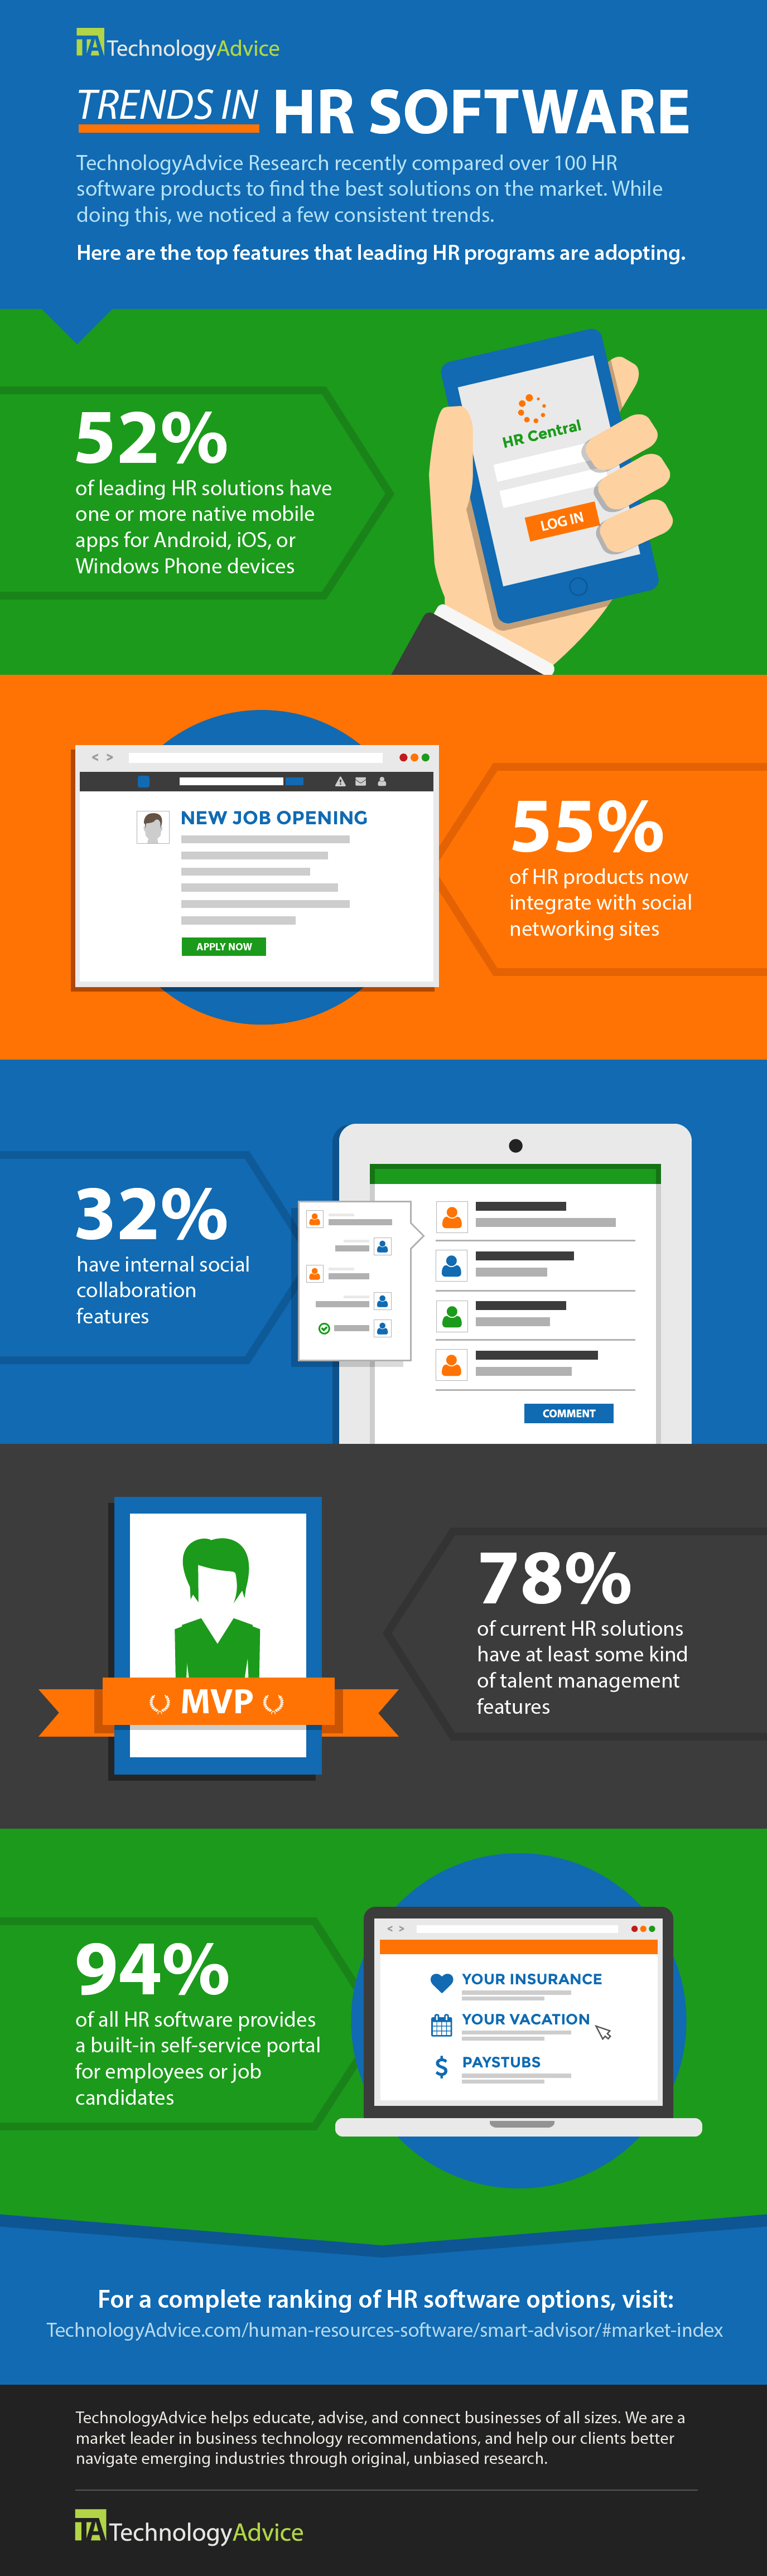 hr infographic on trends in hr software